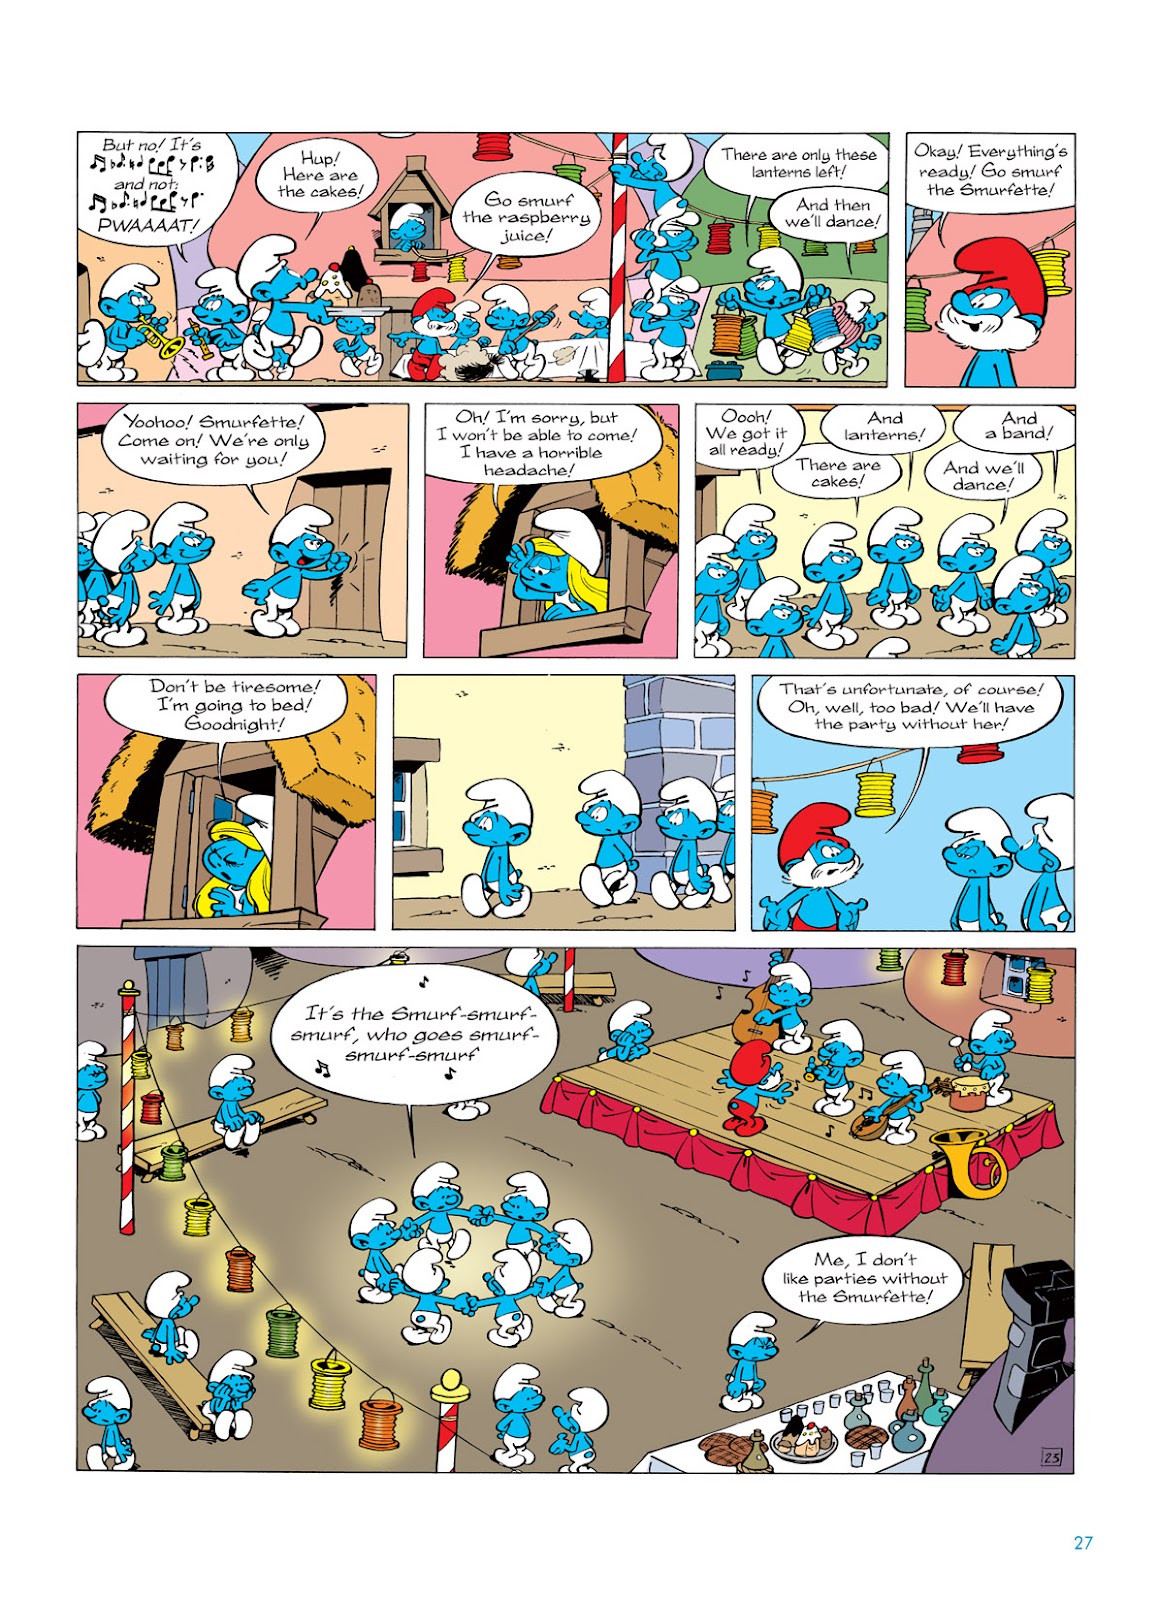 Read online The Smurfs comic -  Issue #4 - 27